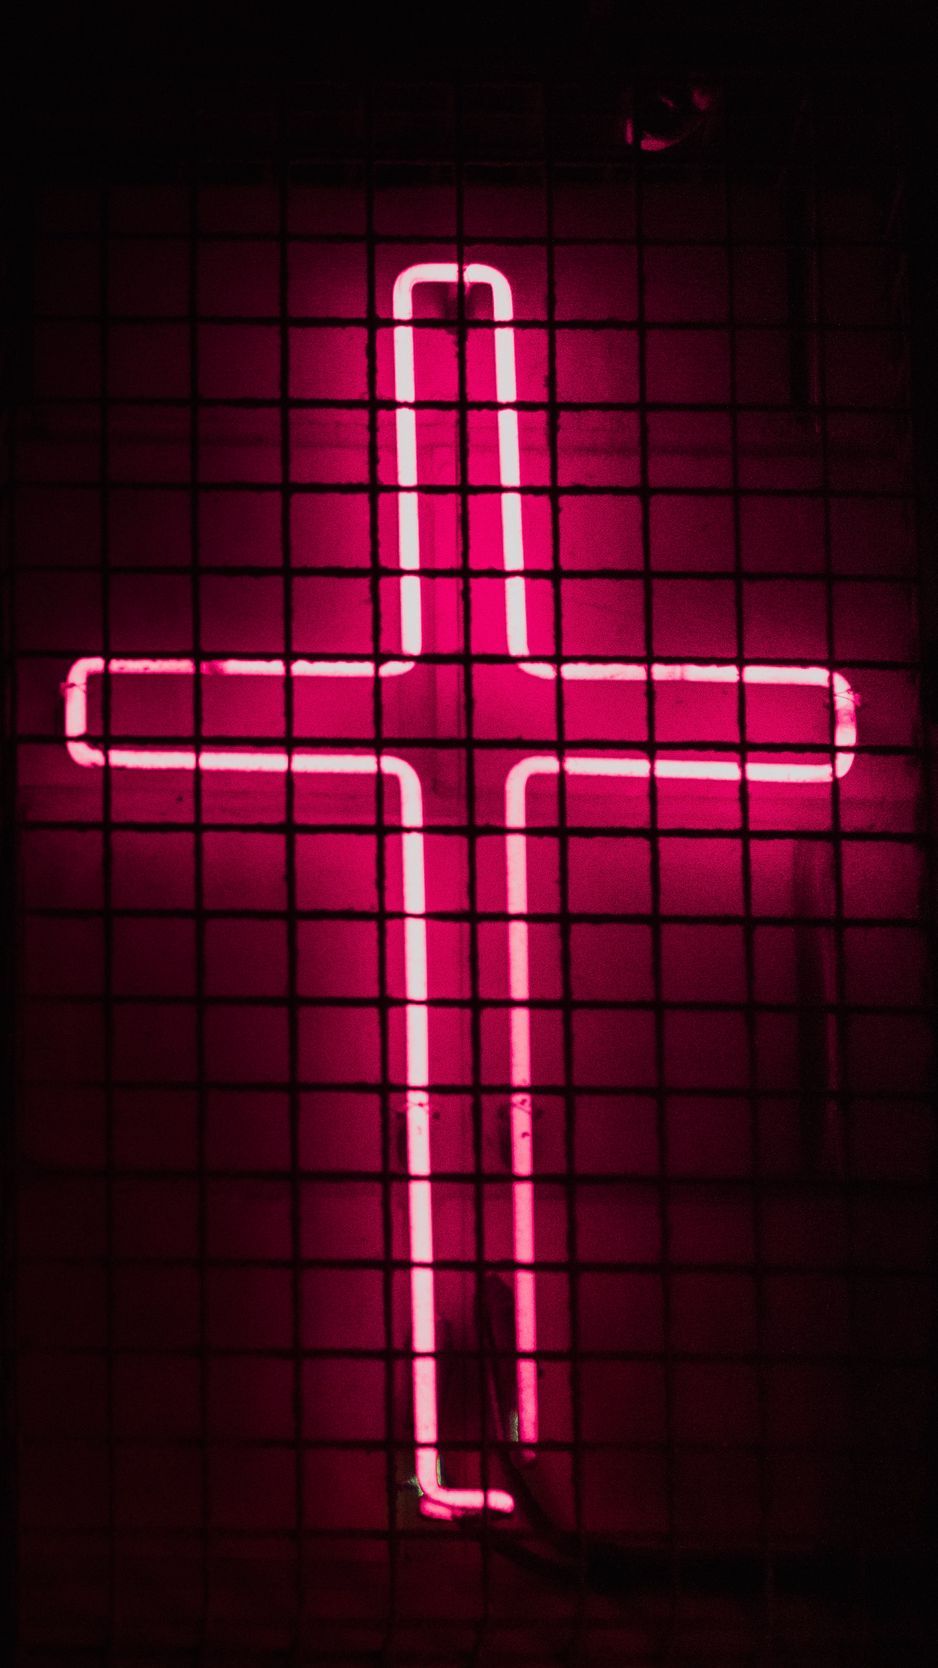 A pink neon cross on a black background - Cross